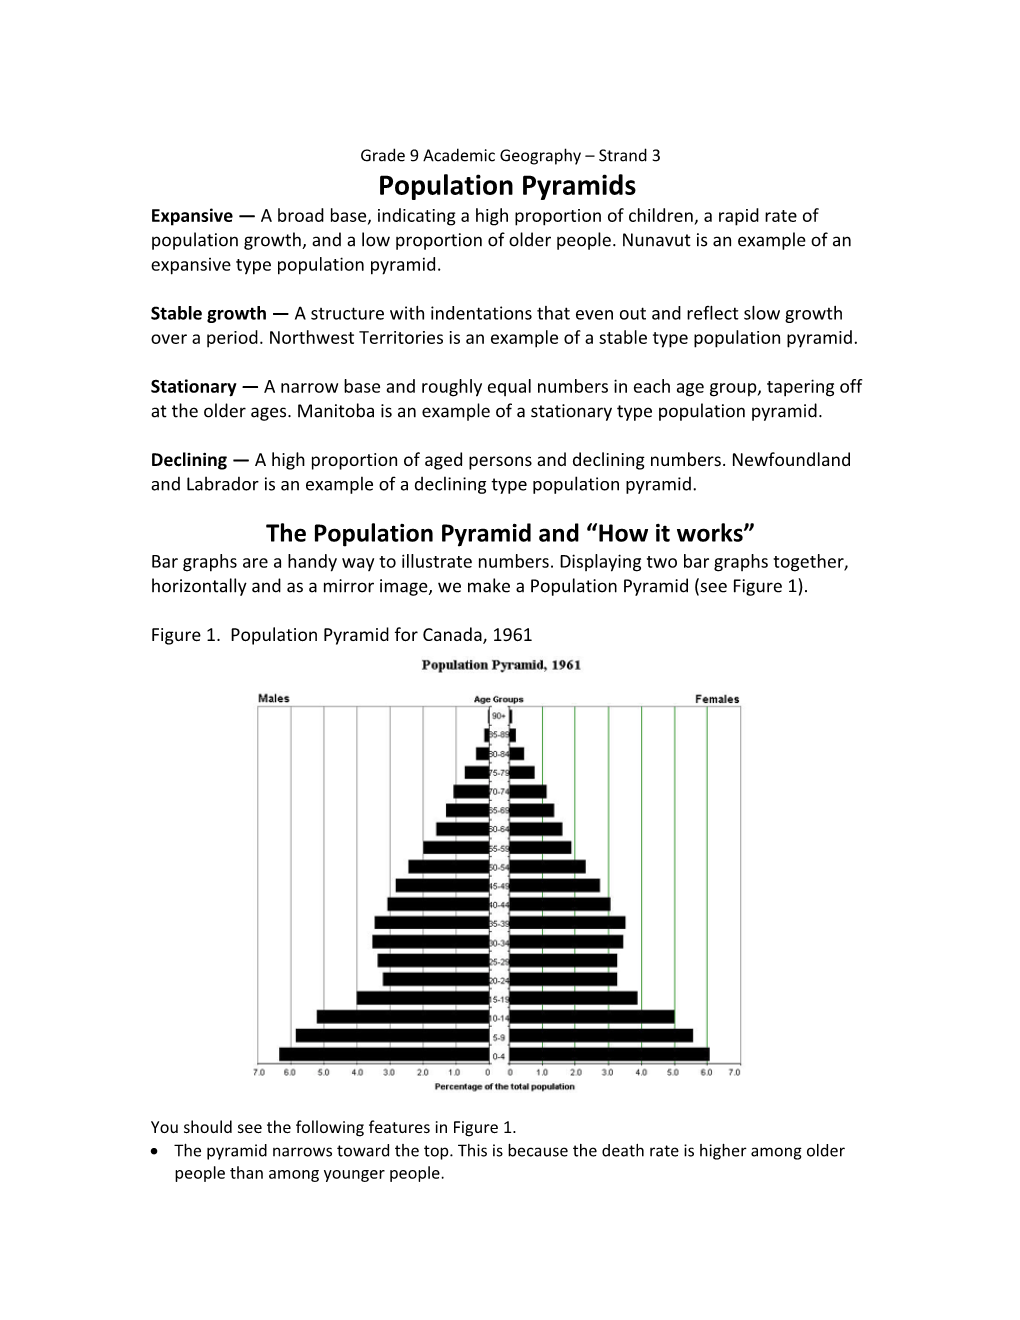 Expansive a Broad Base, Indicating a High Proportion of Children, a Rapid Rate of Population